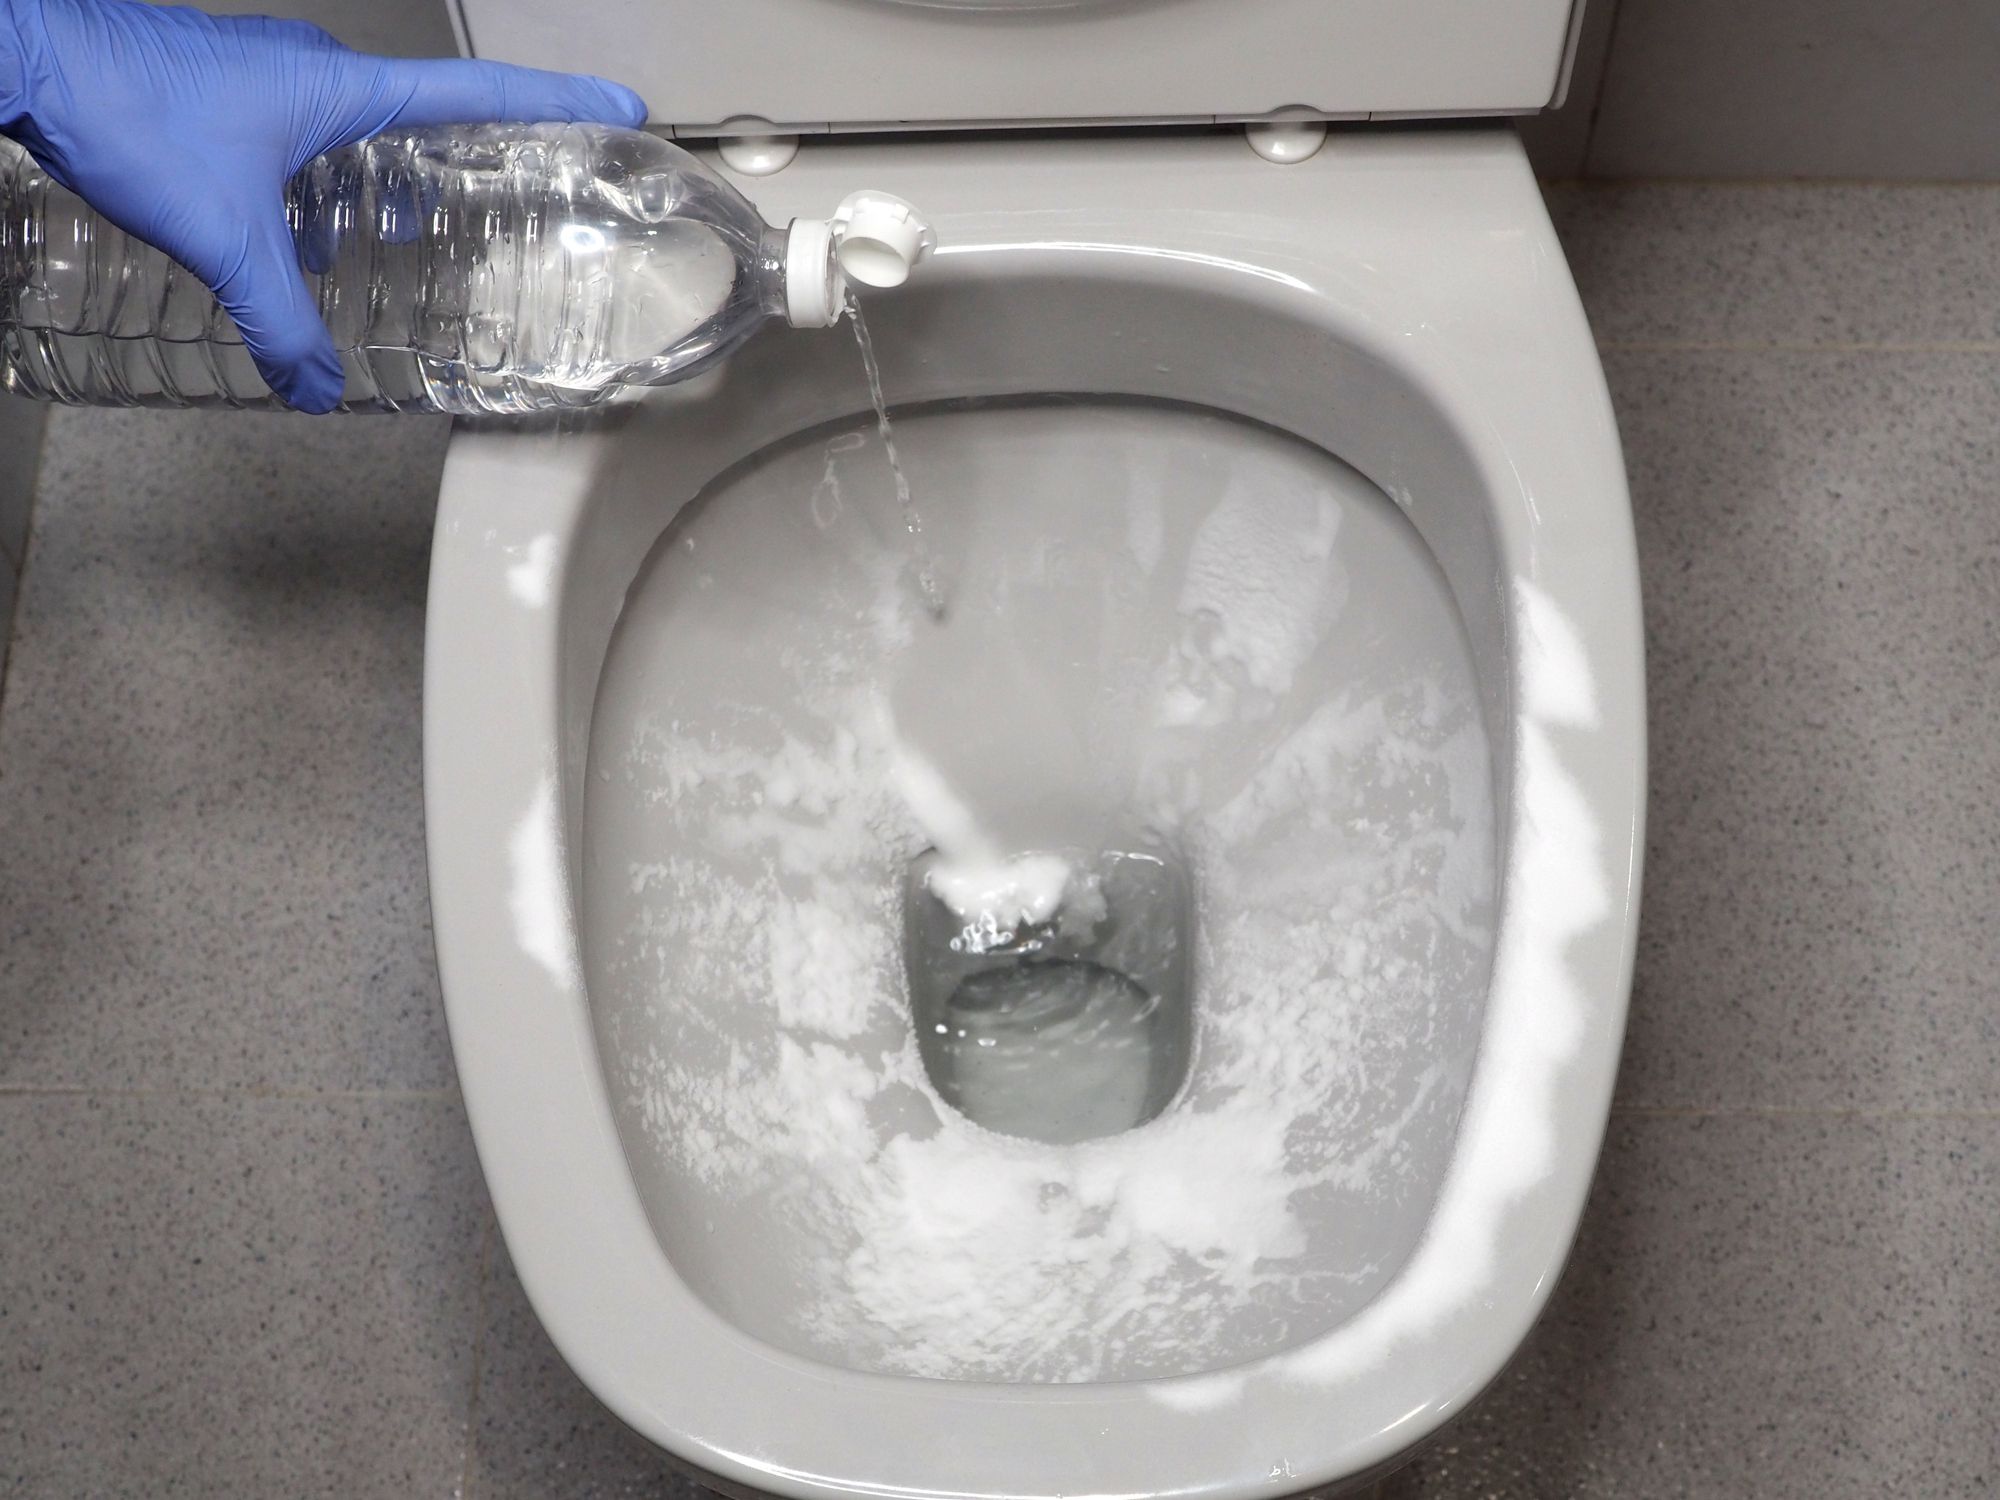 How to clean a toilet, according to experts